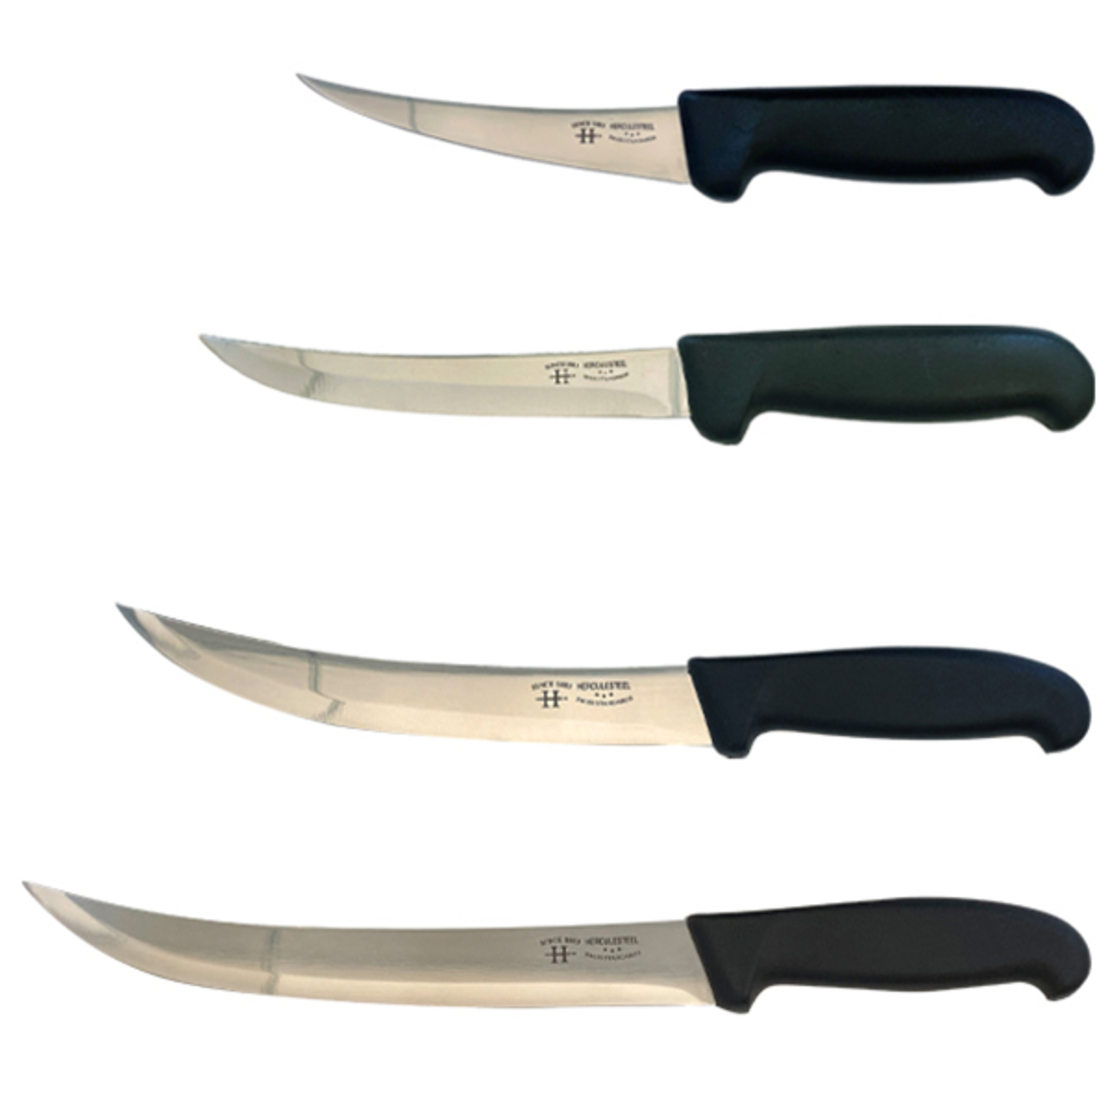 A set of professional butcher kitchen knives, curved head, herculesteel classic